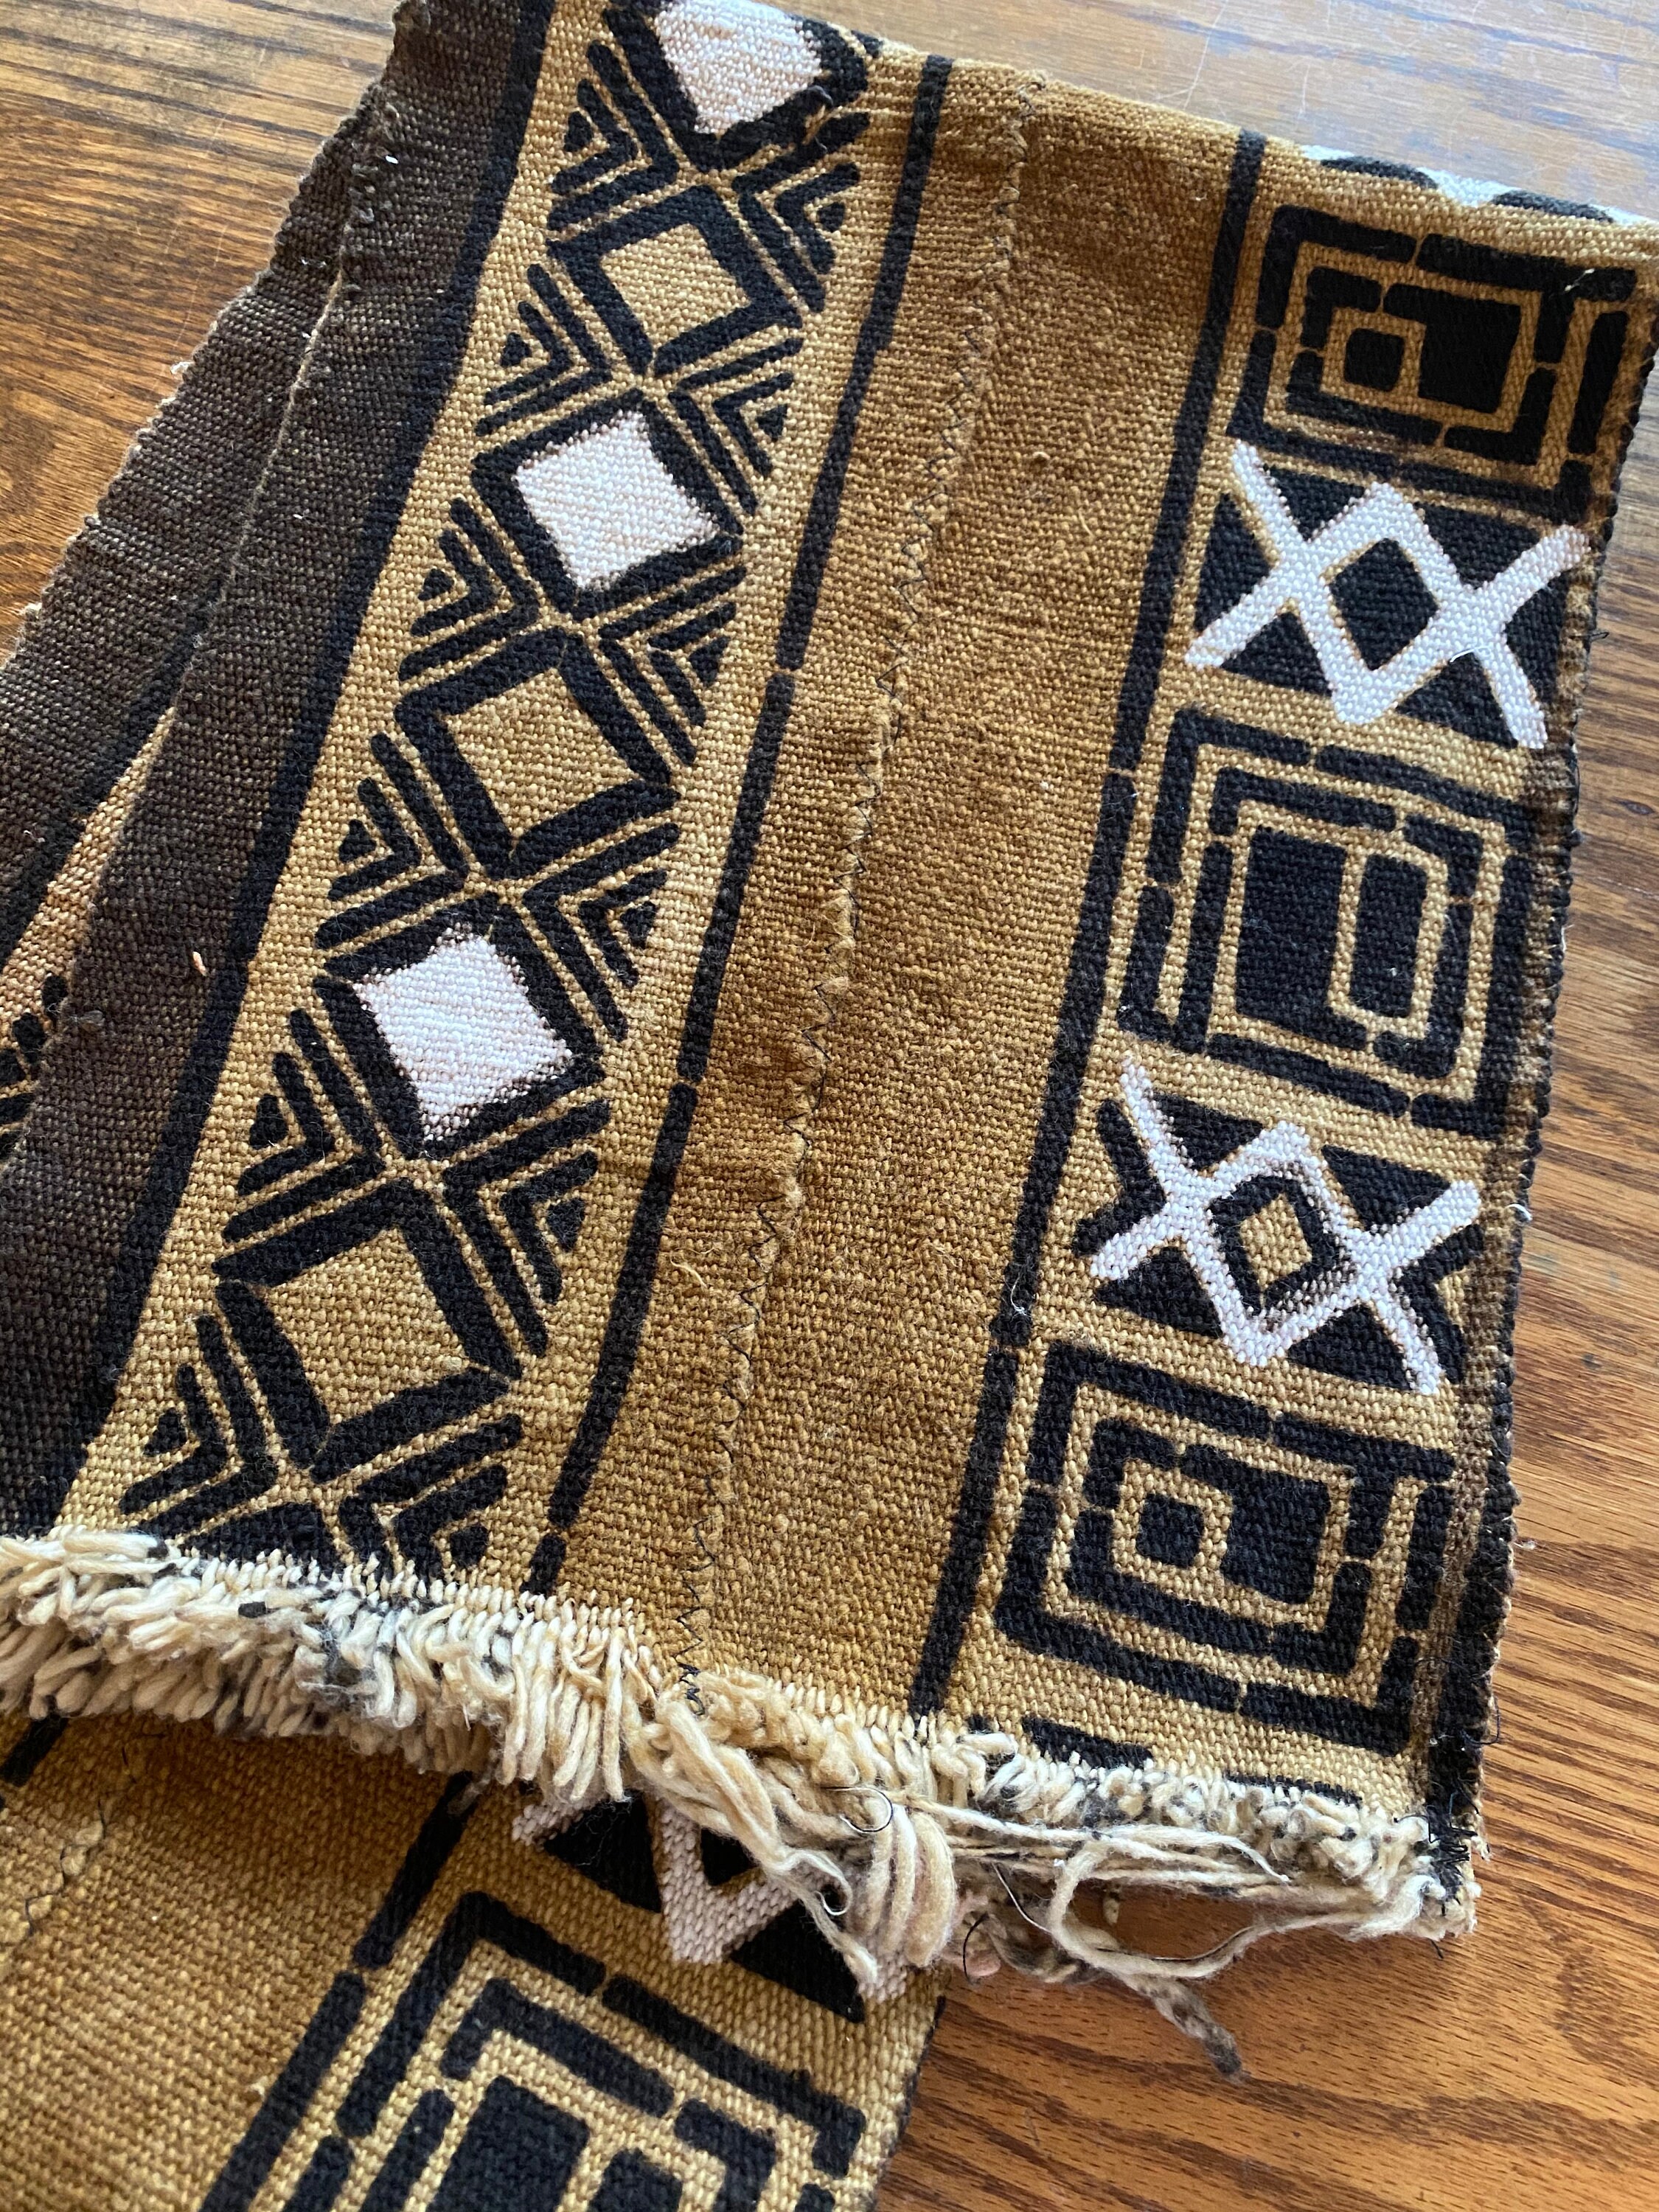 VINTAGE AFRICAN TRIBAL Mudcloth Table Runner/ Fabric is washed | Etsy